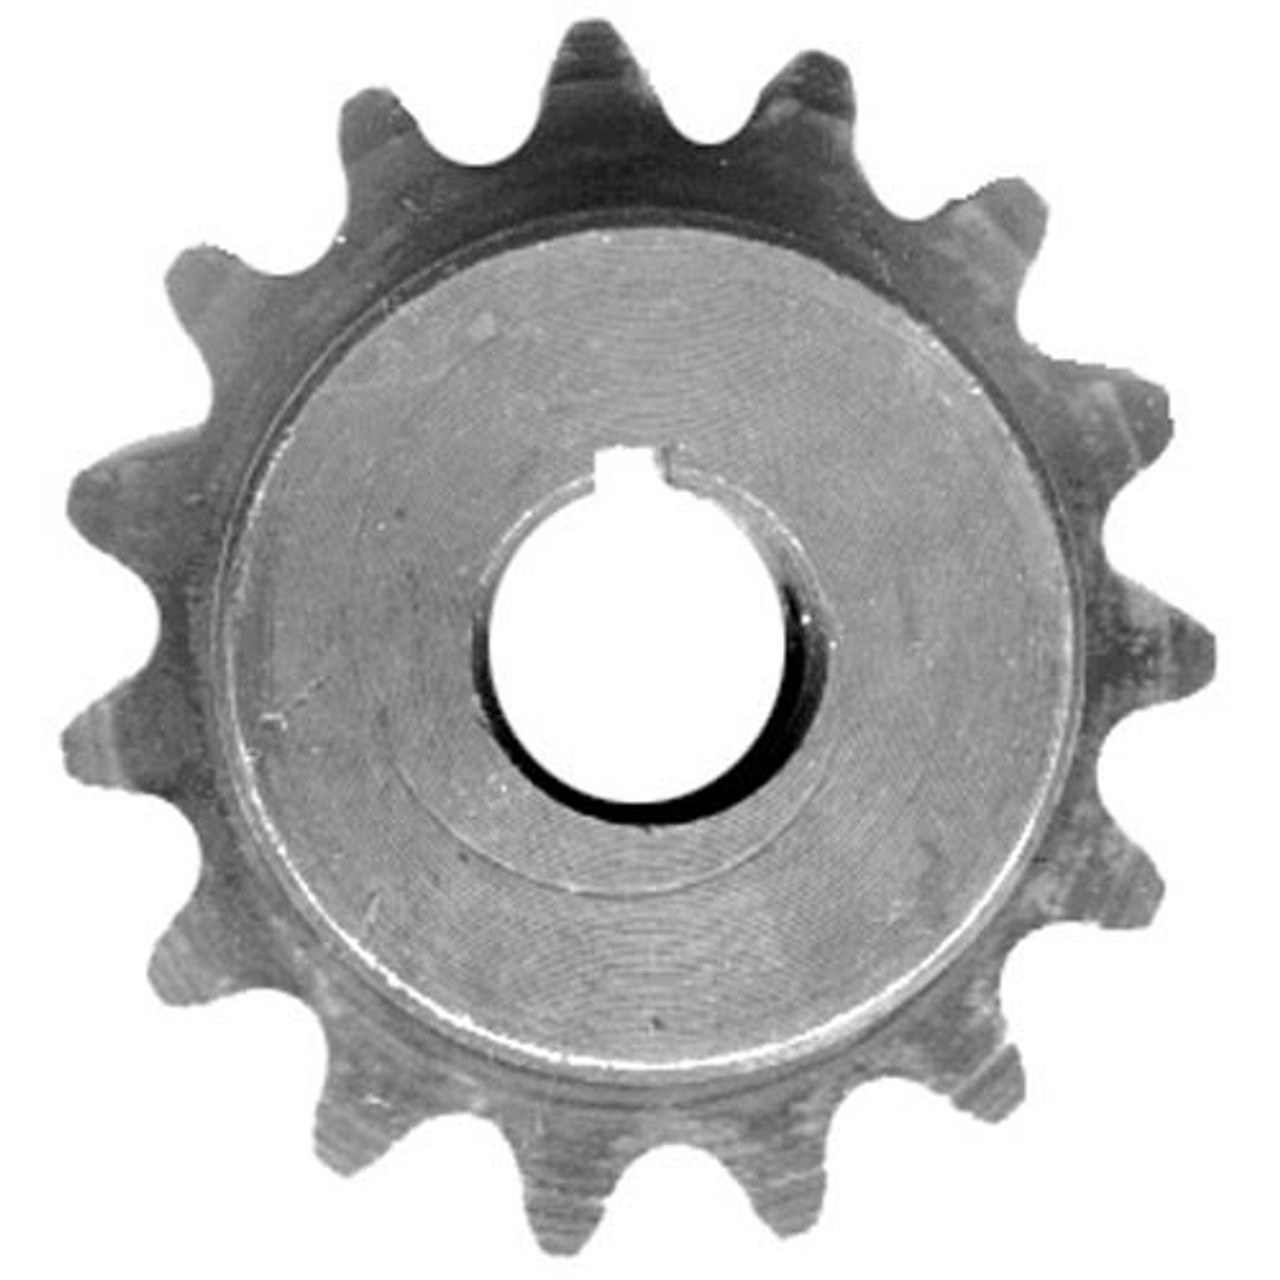  Lincoln 369161 Sprocket, Roller Chain